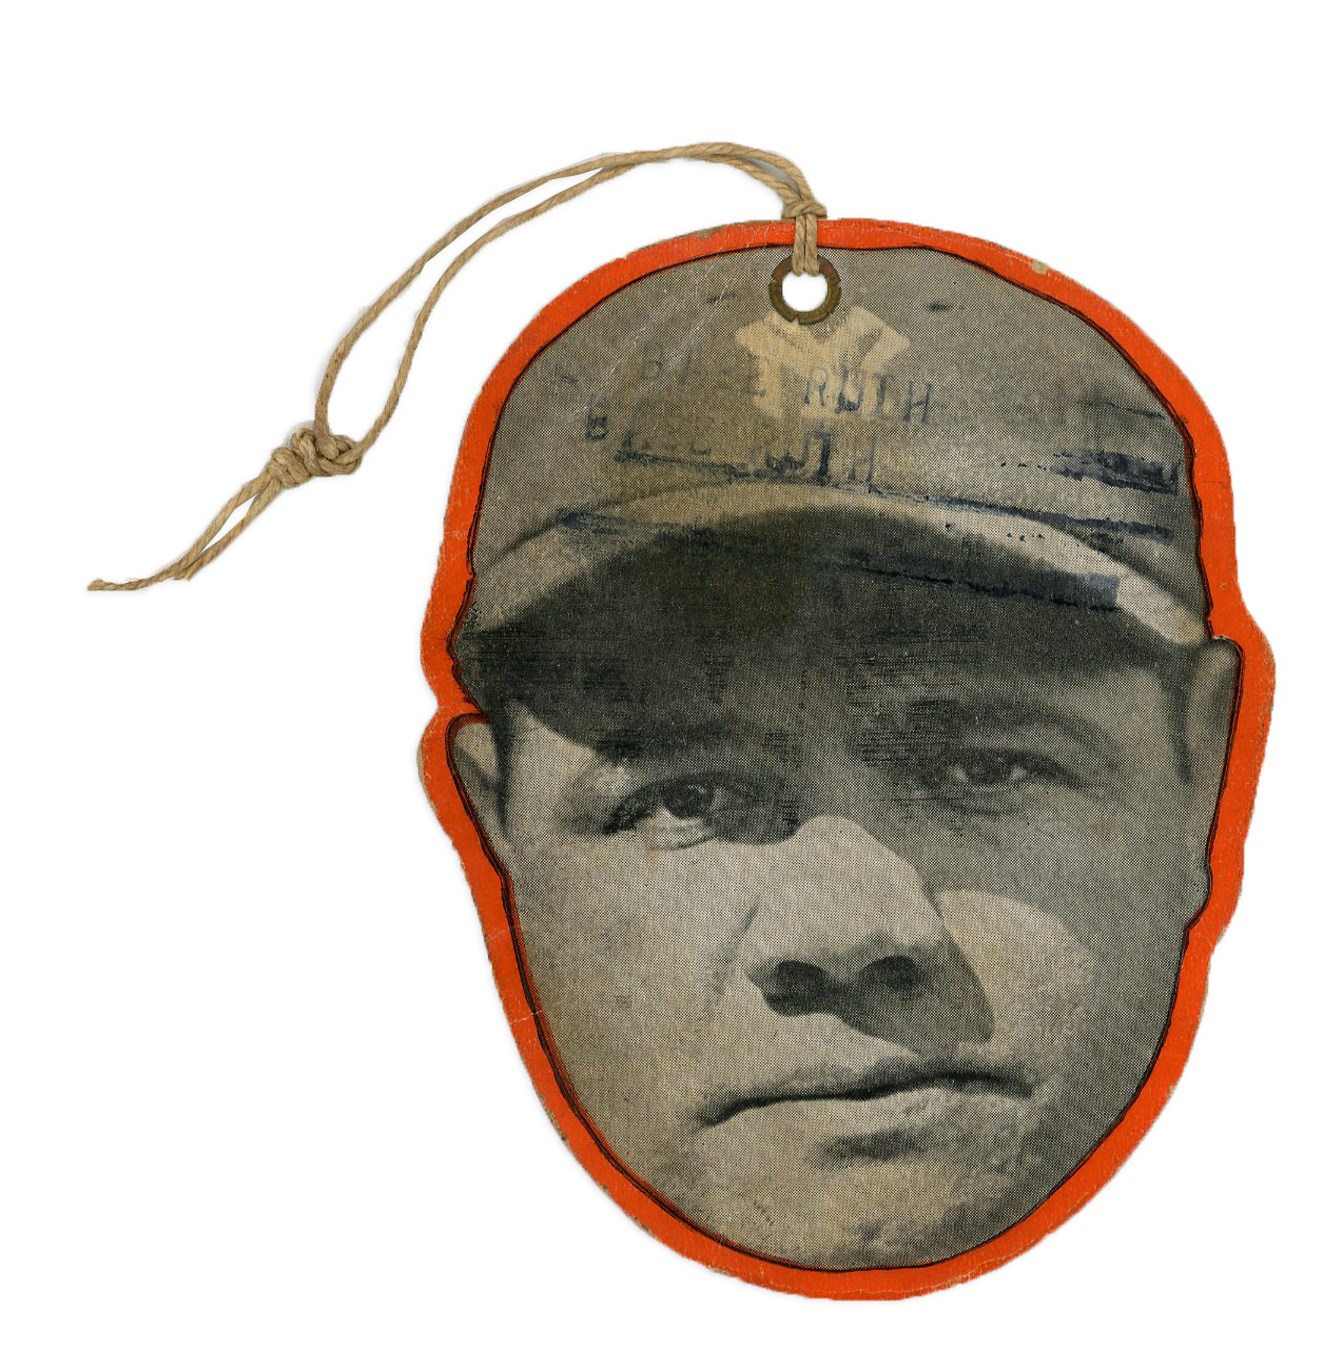 Ruth and Gehrig - Babe Ruth 1920s Reach Large Die-Cut Illustrated Equipment Tag in the Shape of Ruth's Head